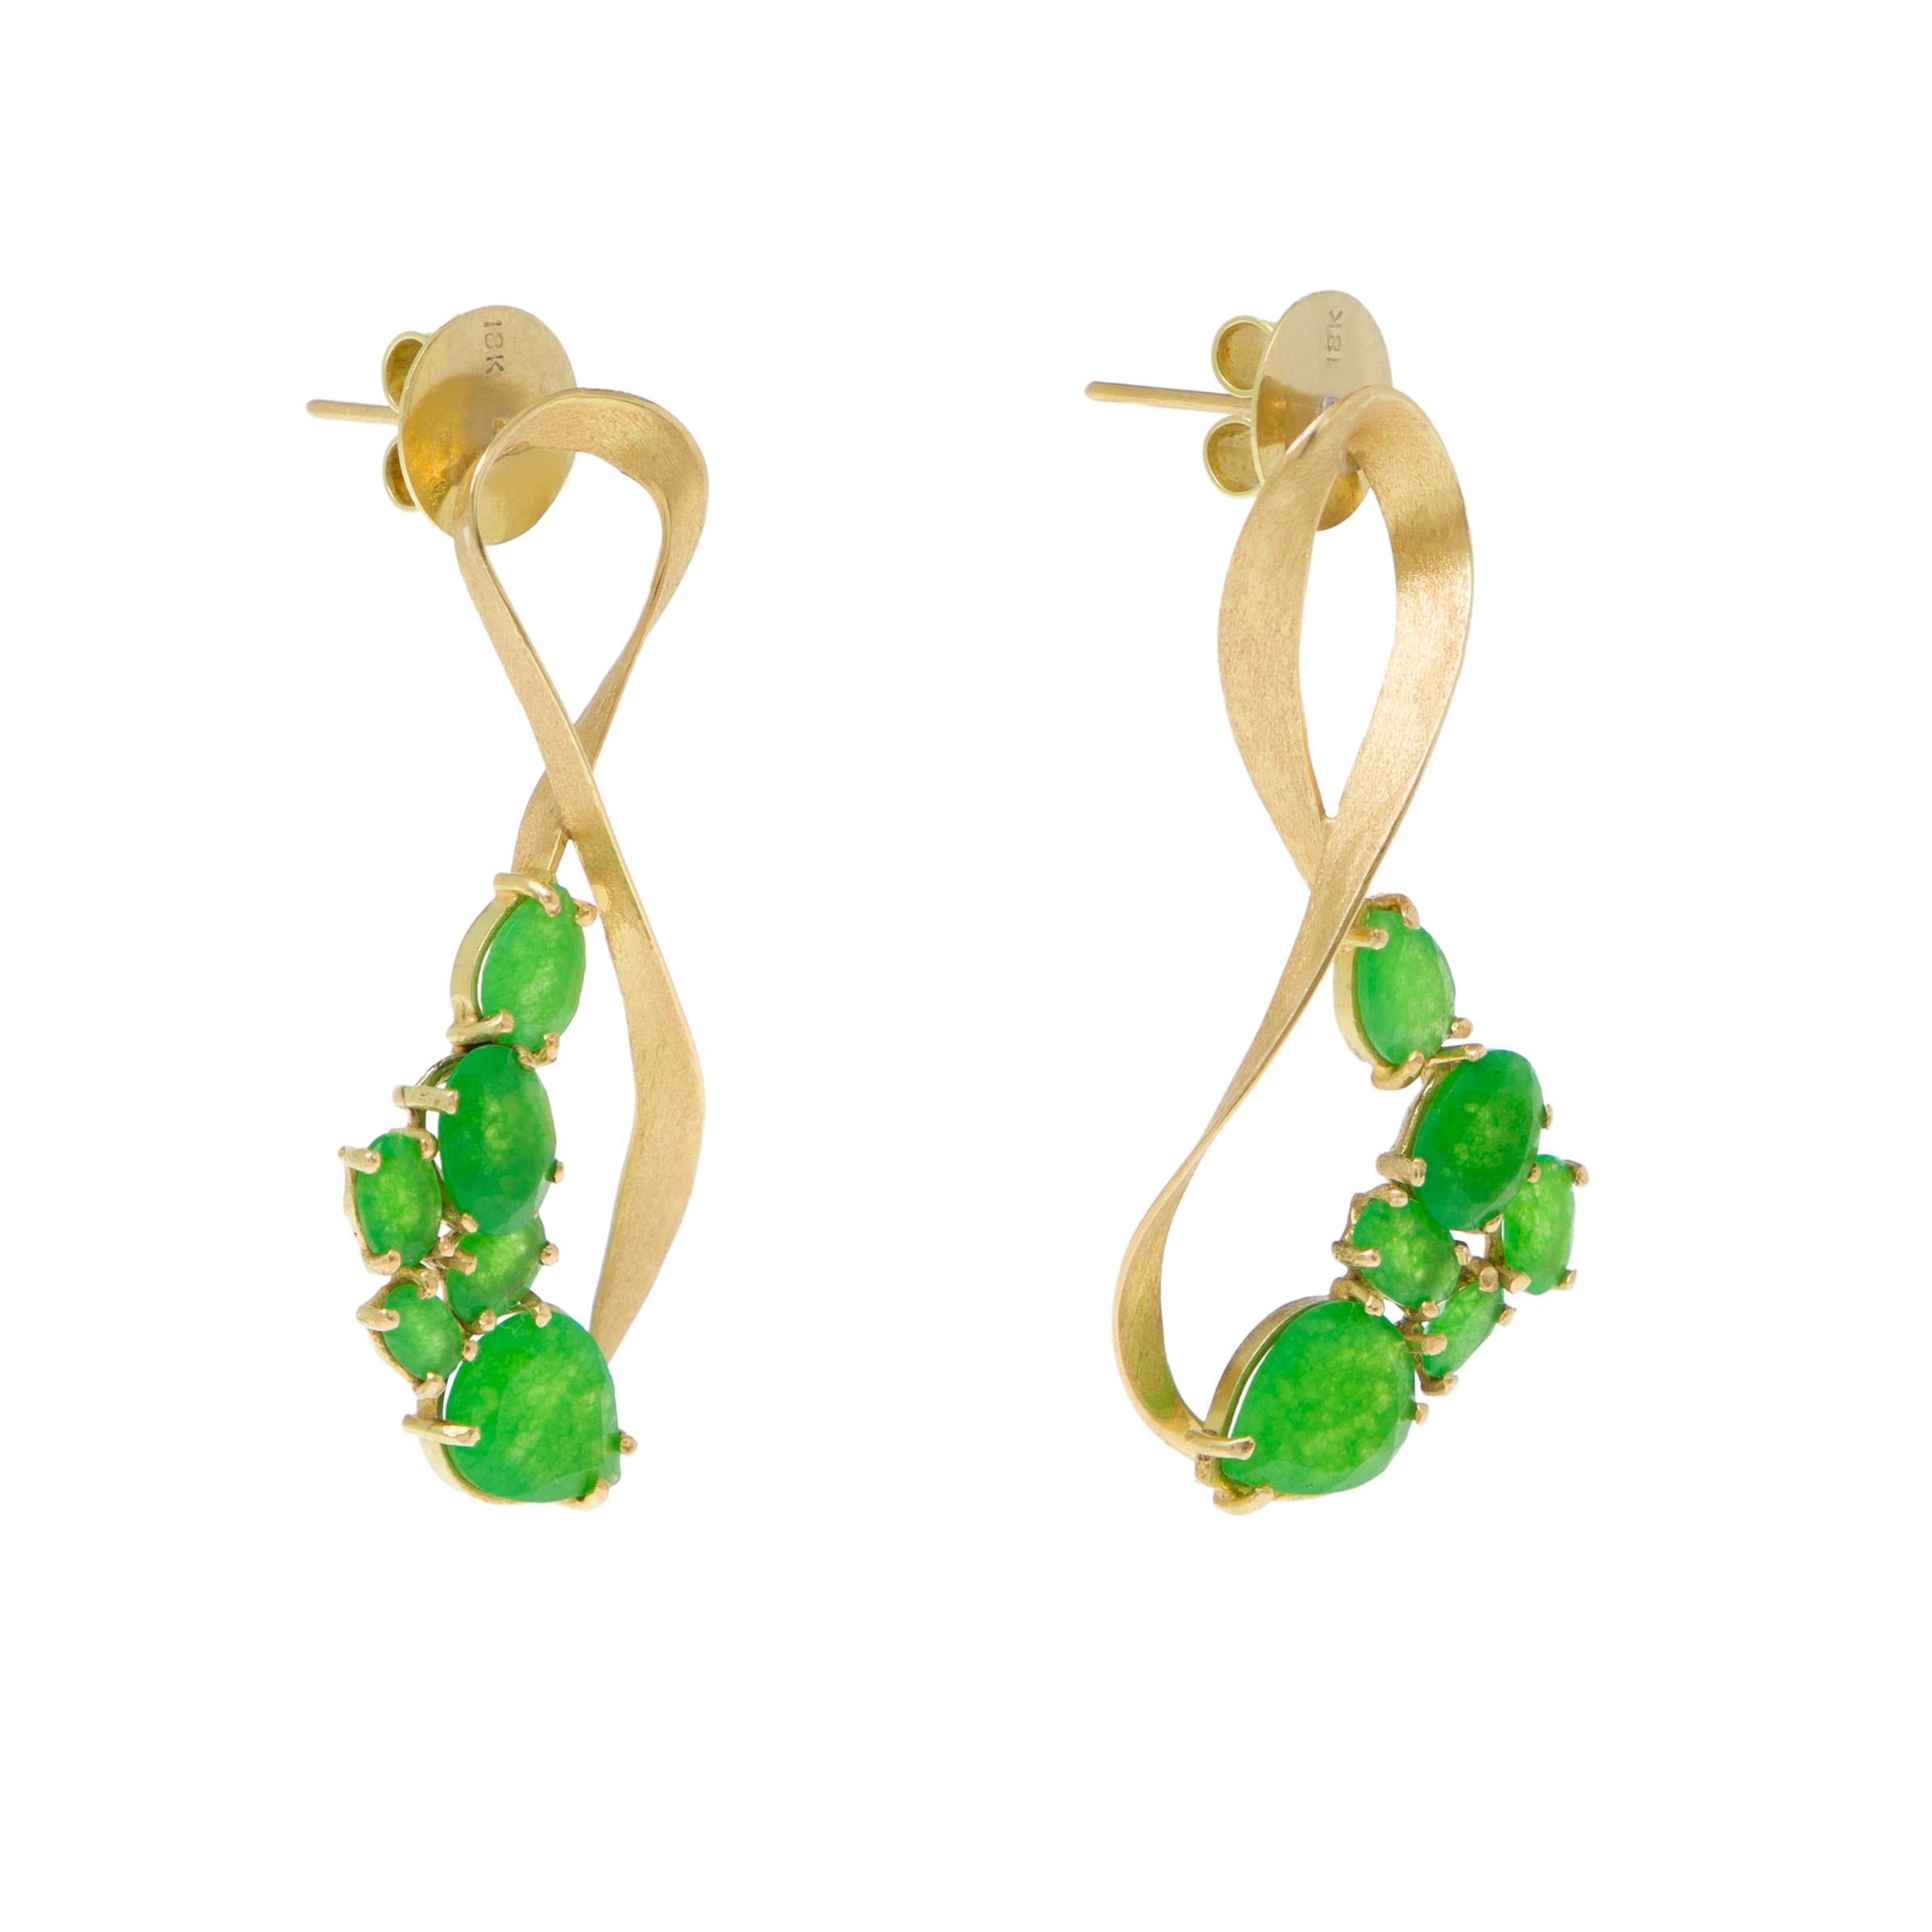 Earrings
Gold 18K 
Malaysia Jade
Handmade, polished and matte finish and bezel setting

Van Gogh’s “Still Life Glass with Wild Flowers” is a mystery.  Even after rummaging through his brother Theo’s letters we weren’t able to discover what kind of